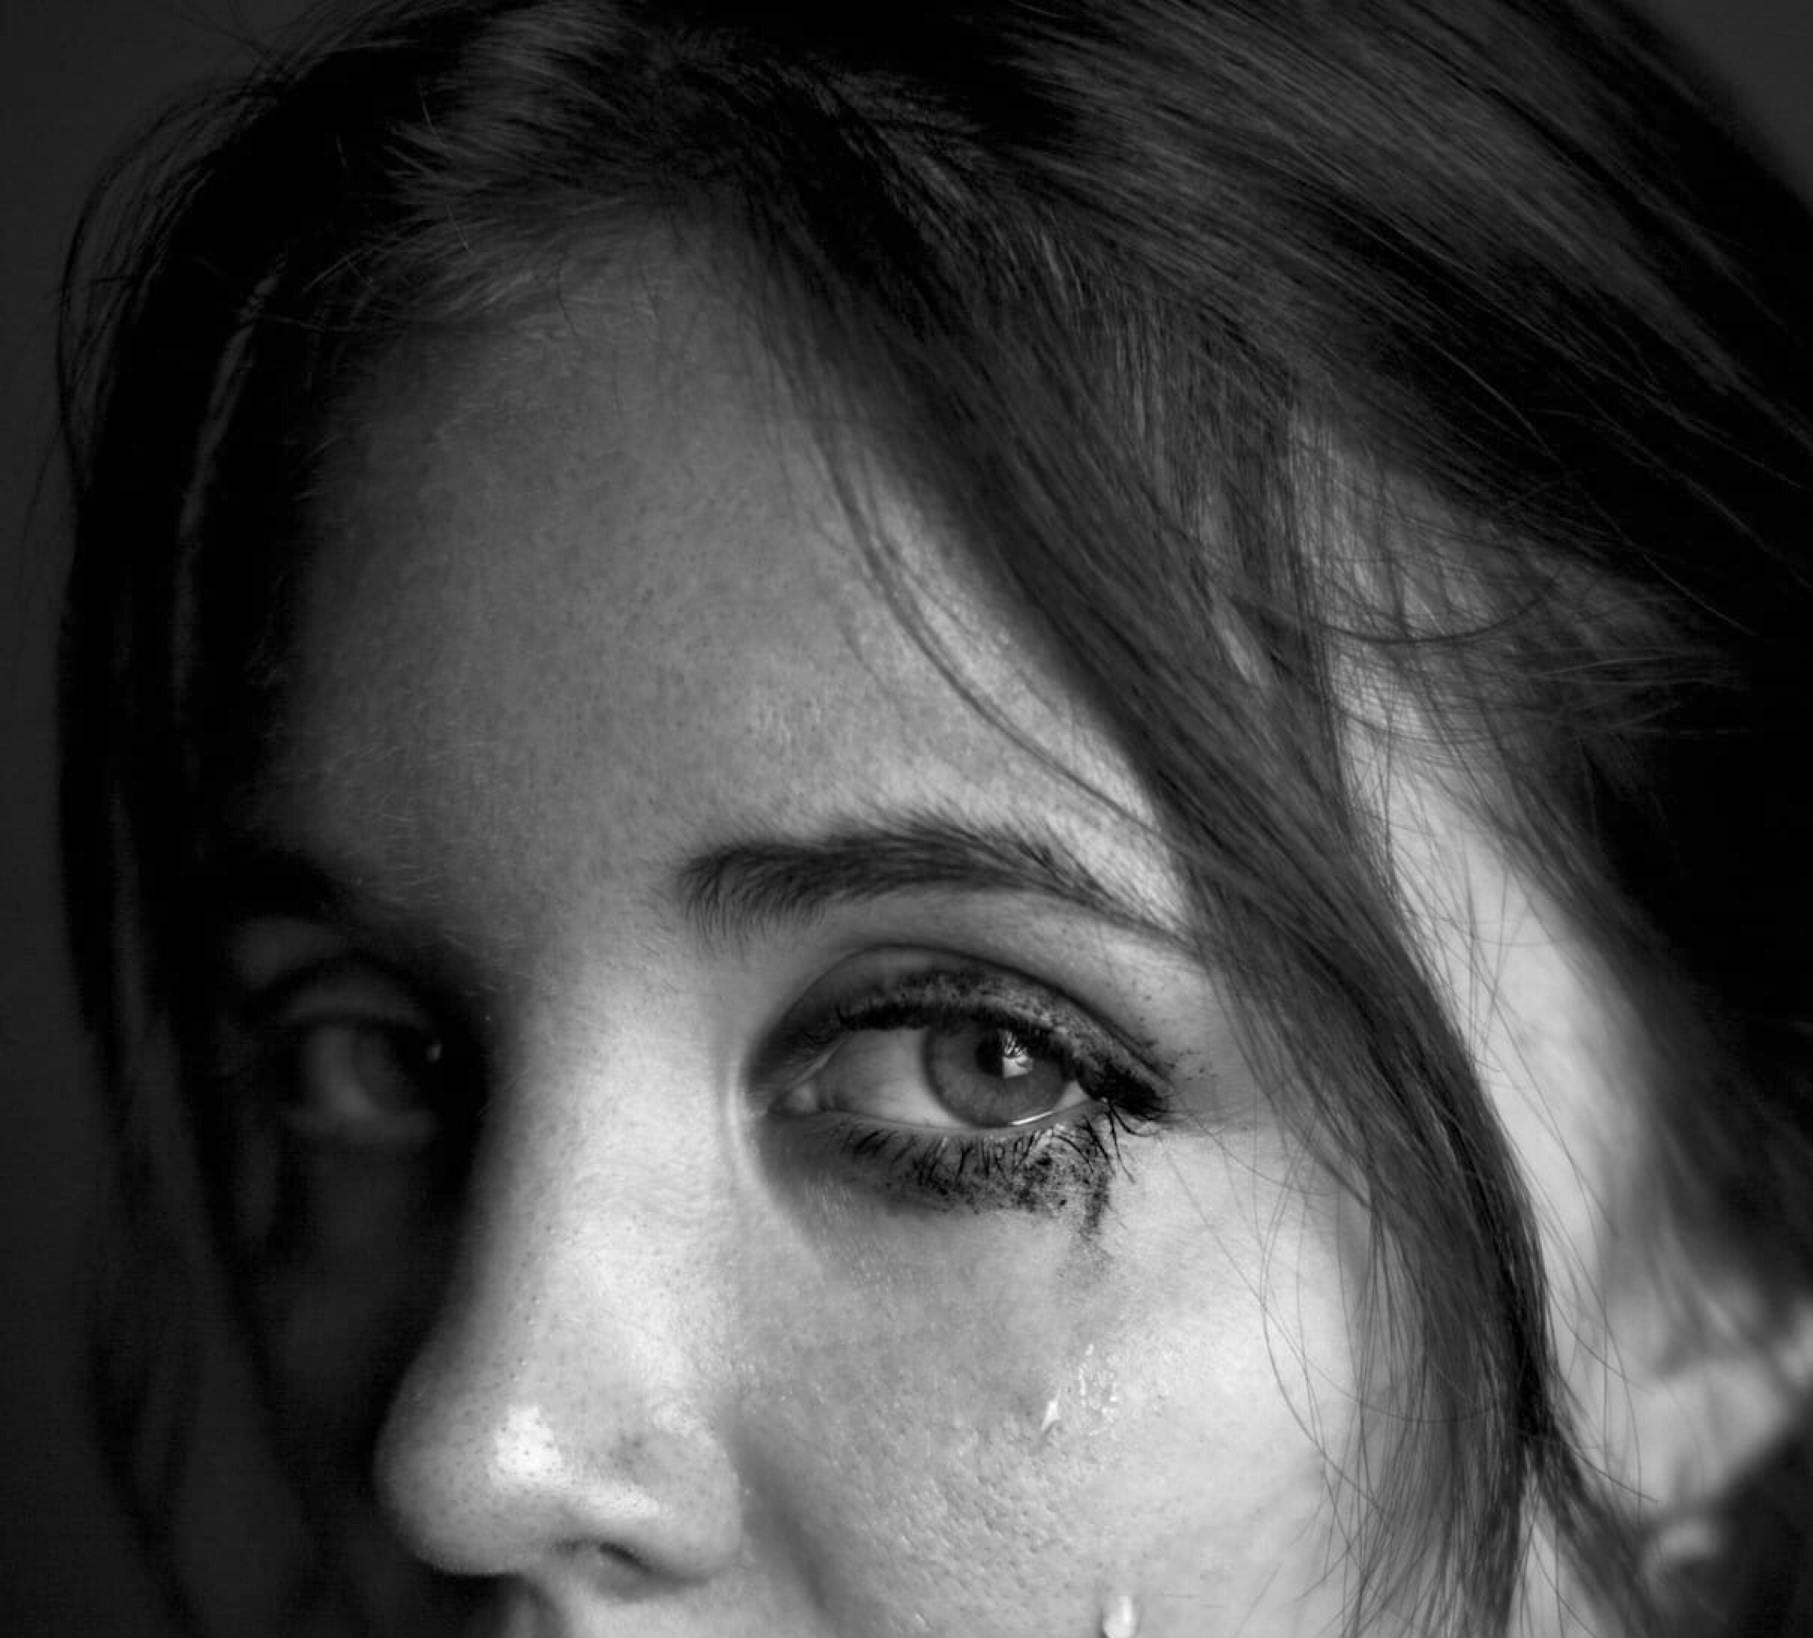 A teary-eyed woman | Source: Pexels